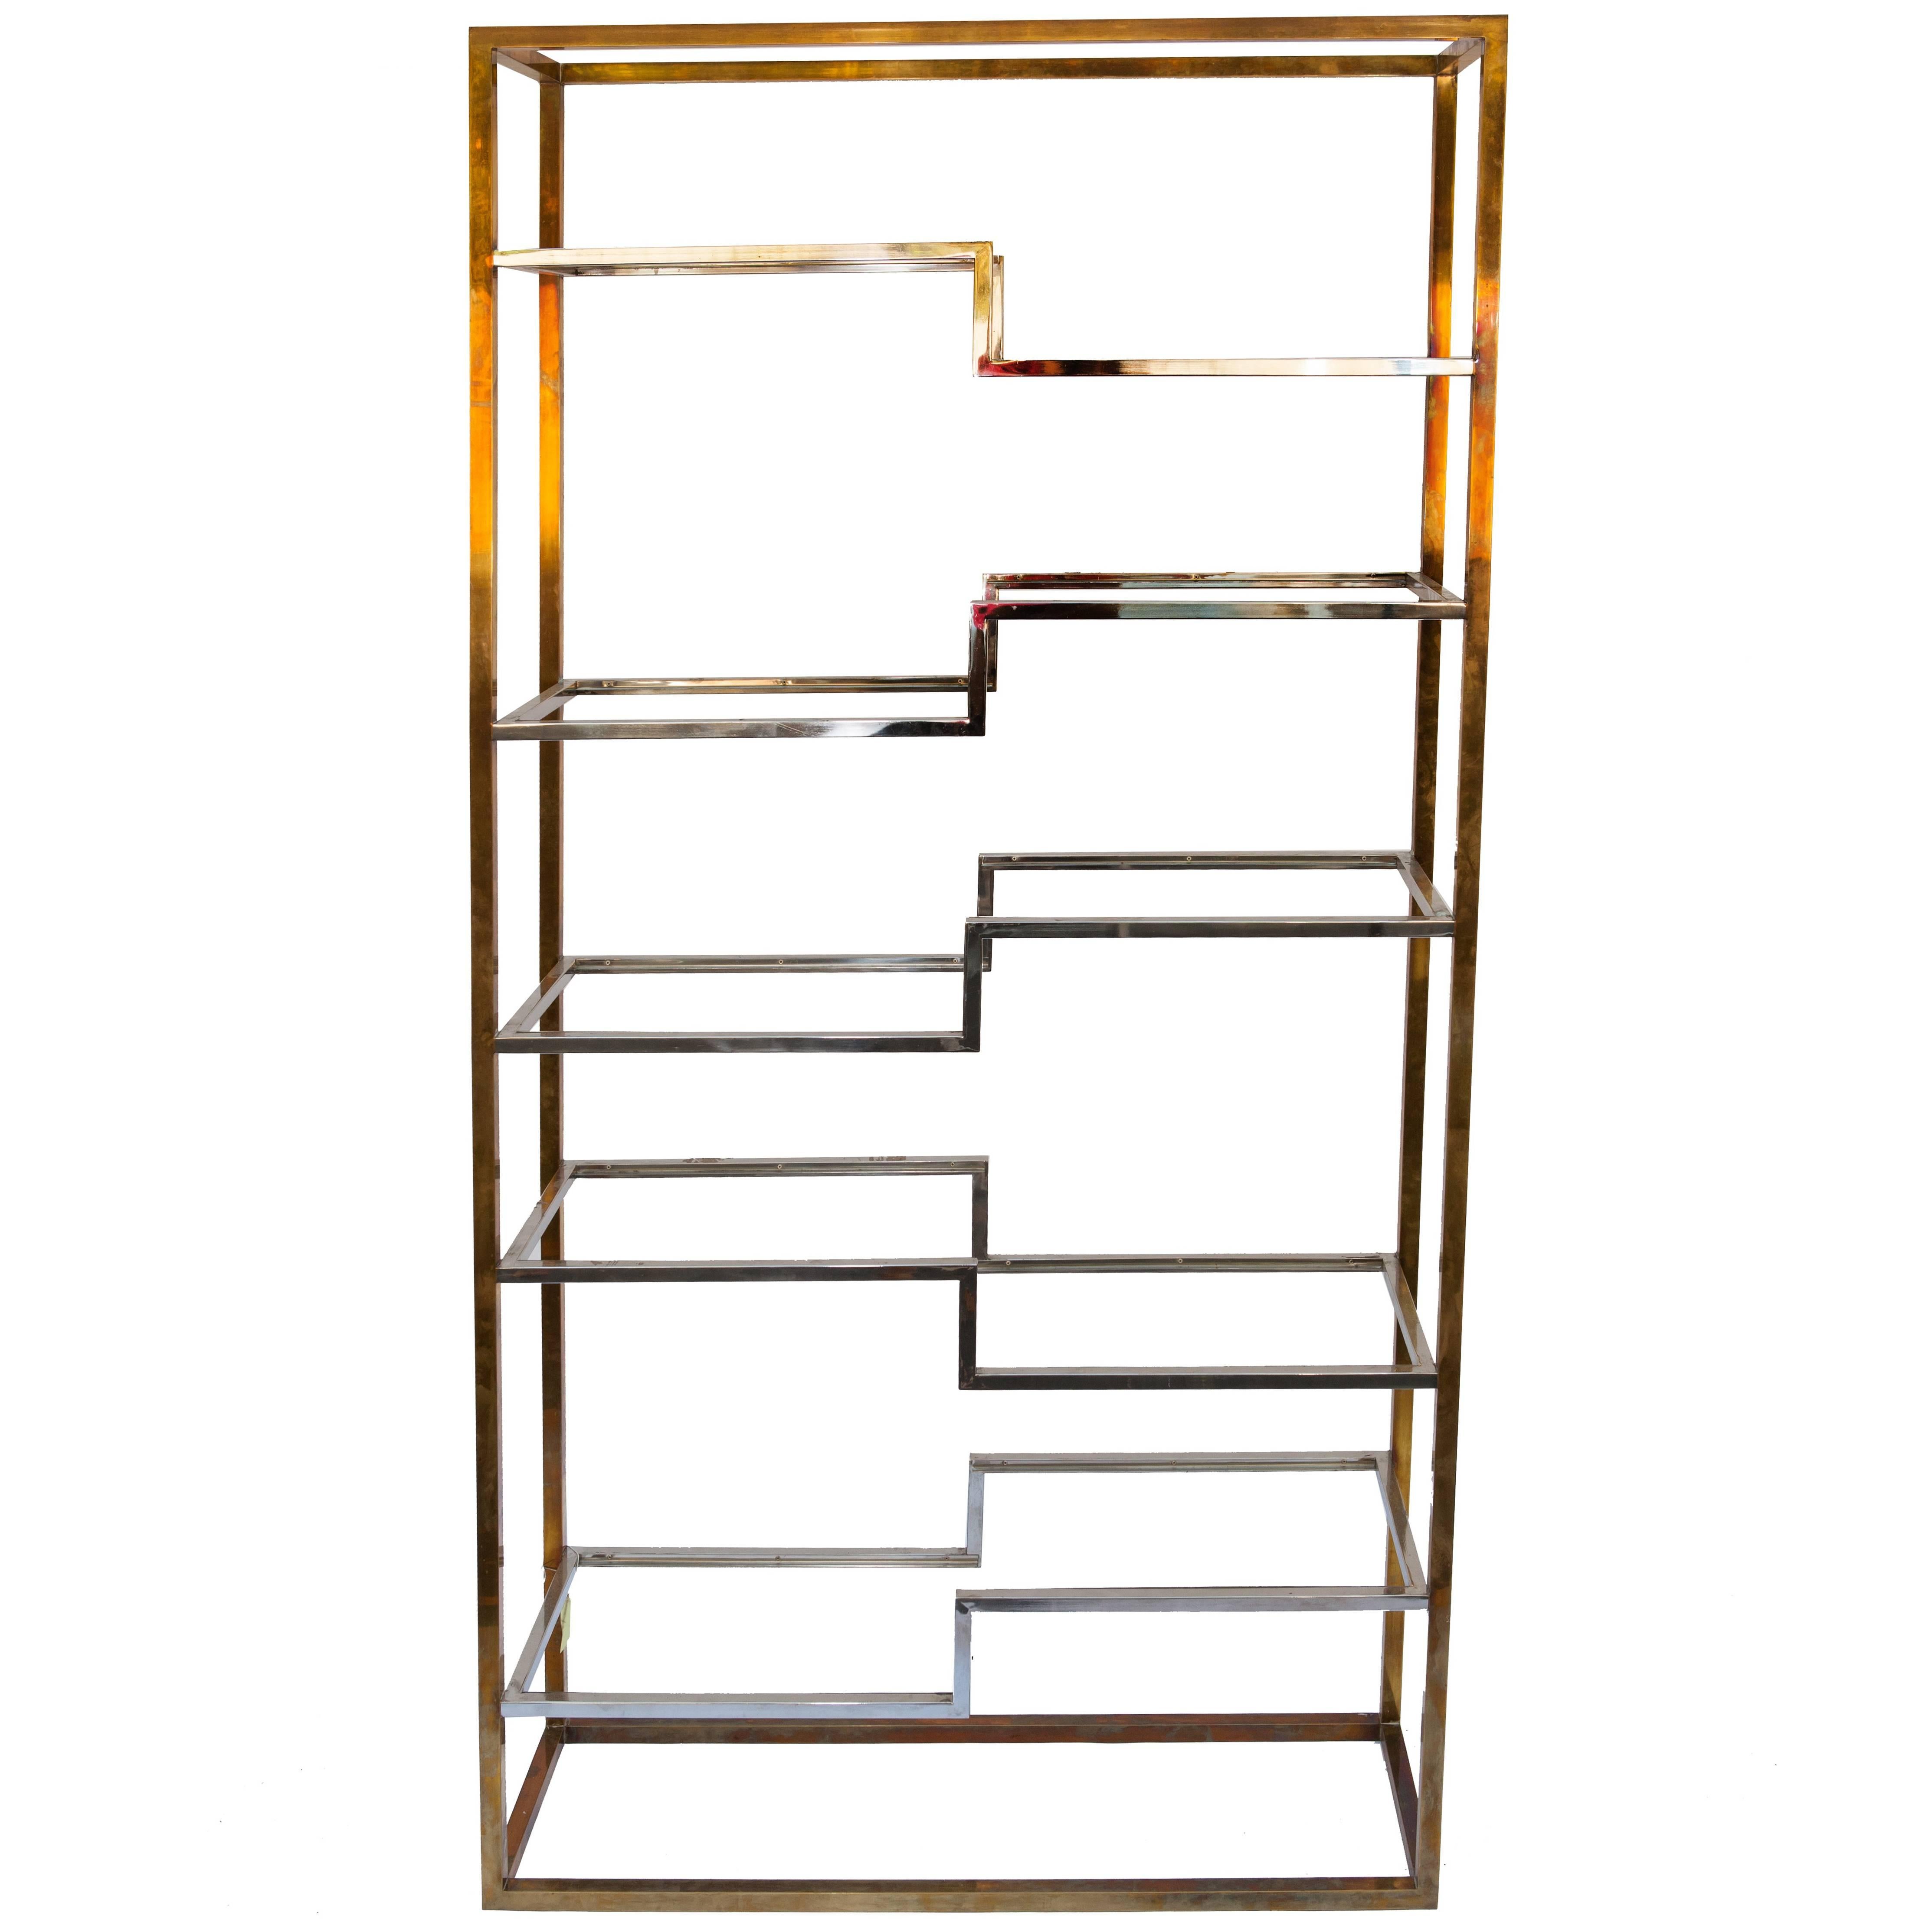 French Modern Glam Brass and Glass Etagère with Whimsical Shelves from the 1960s